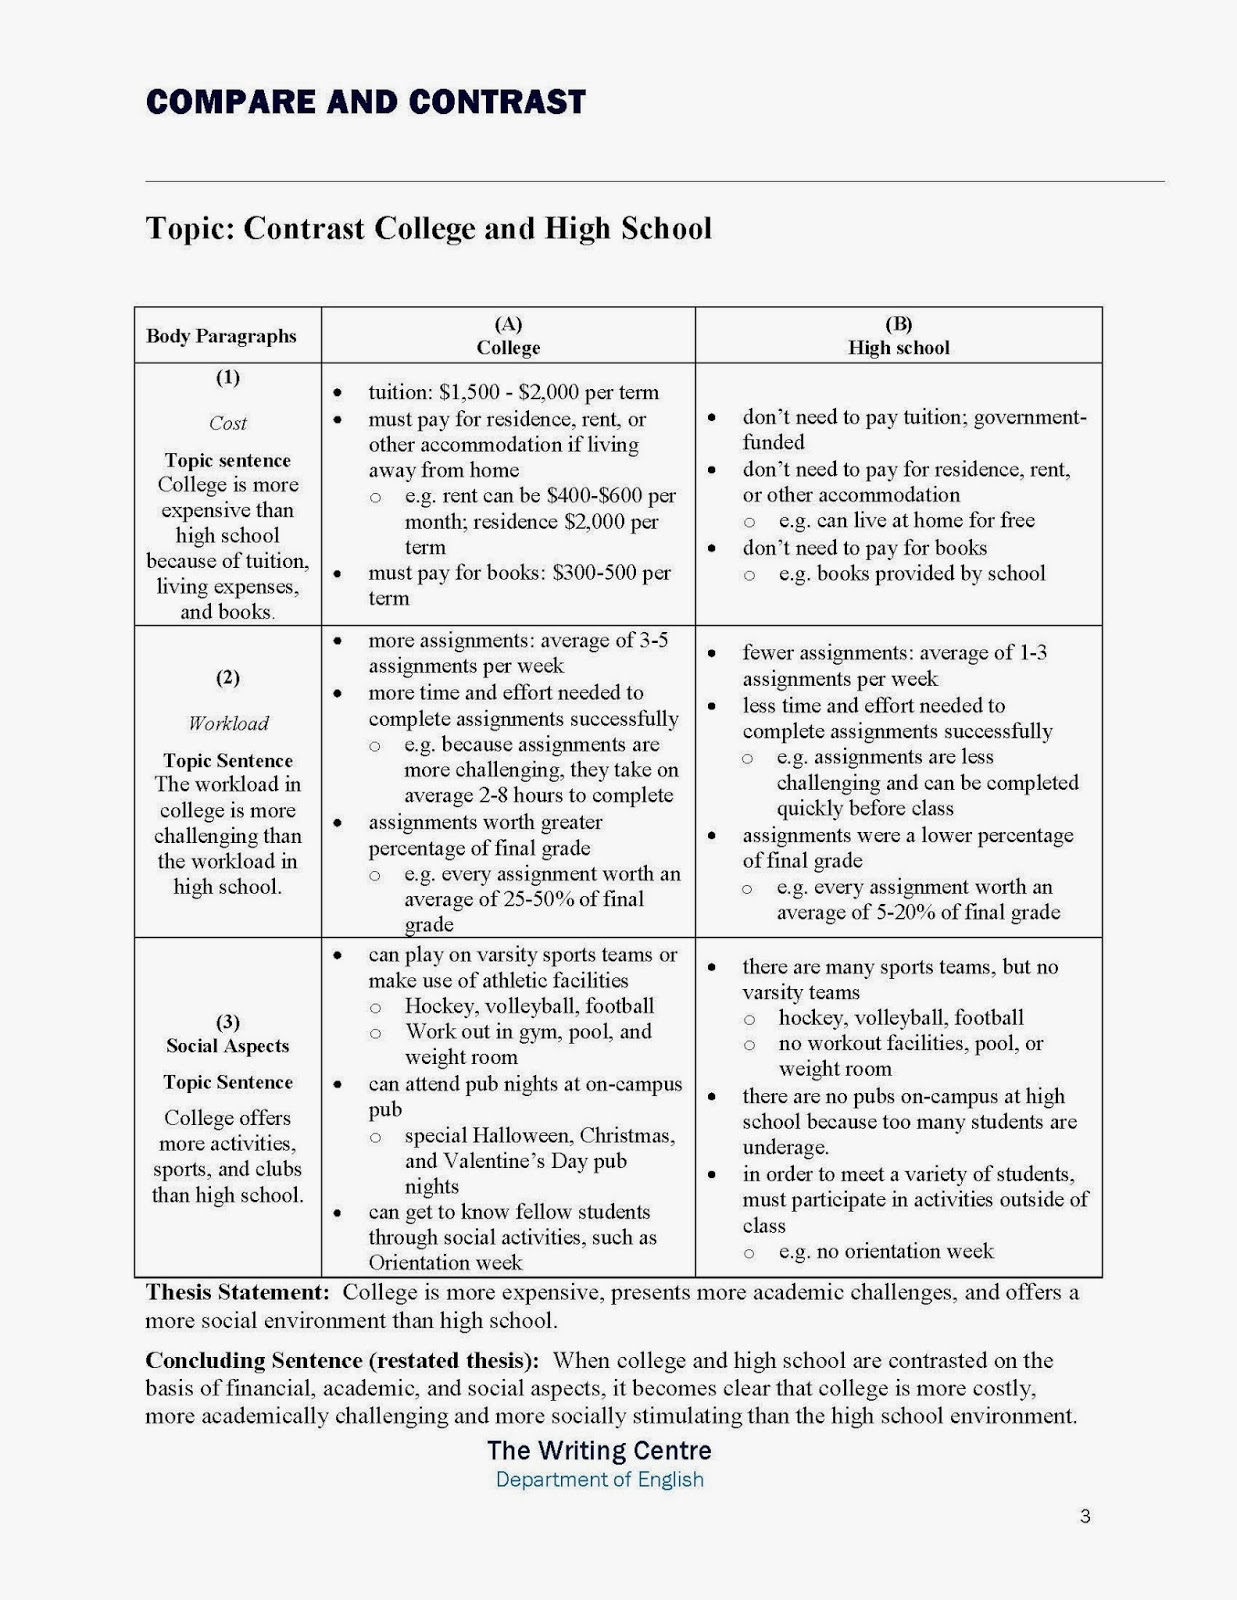 Buy a compare and contrast essay